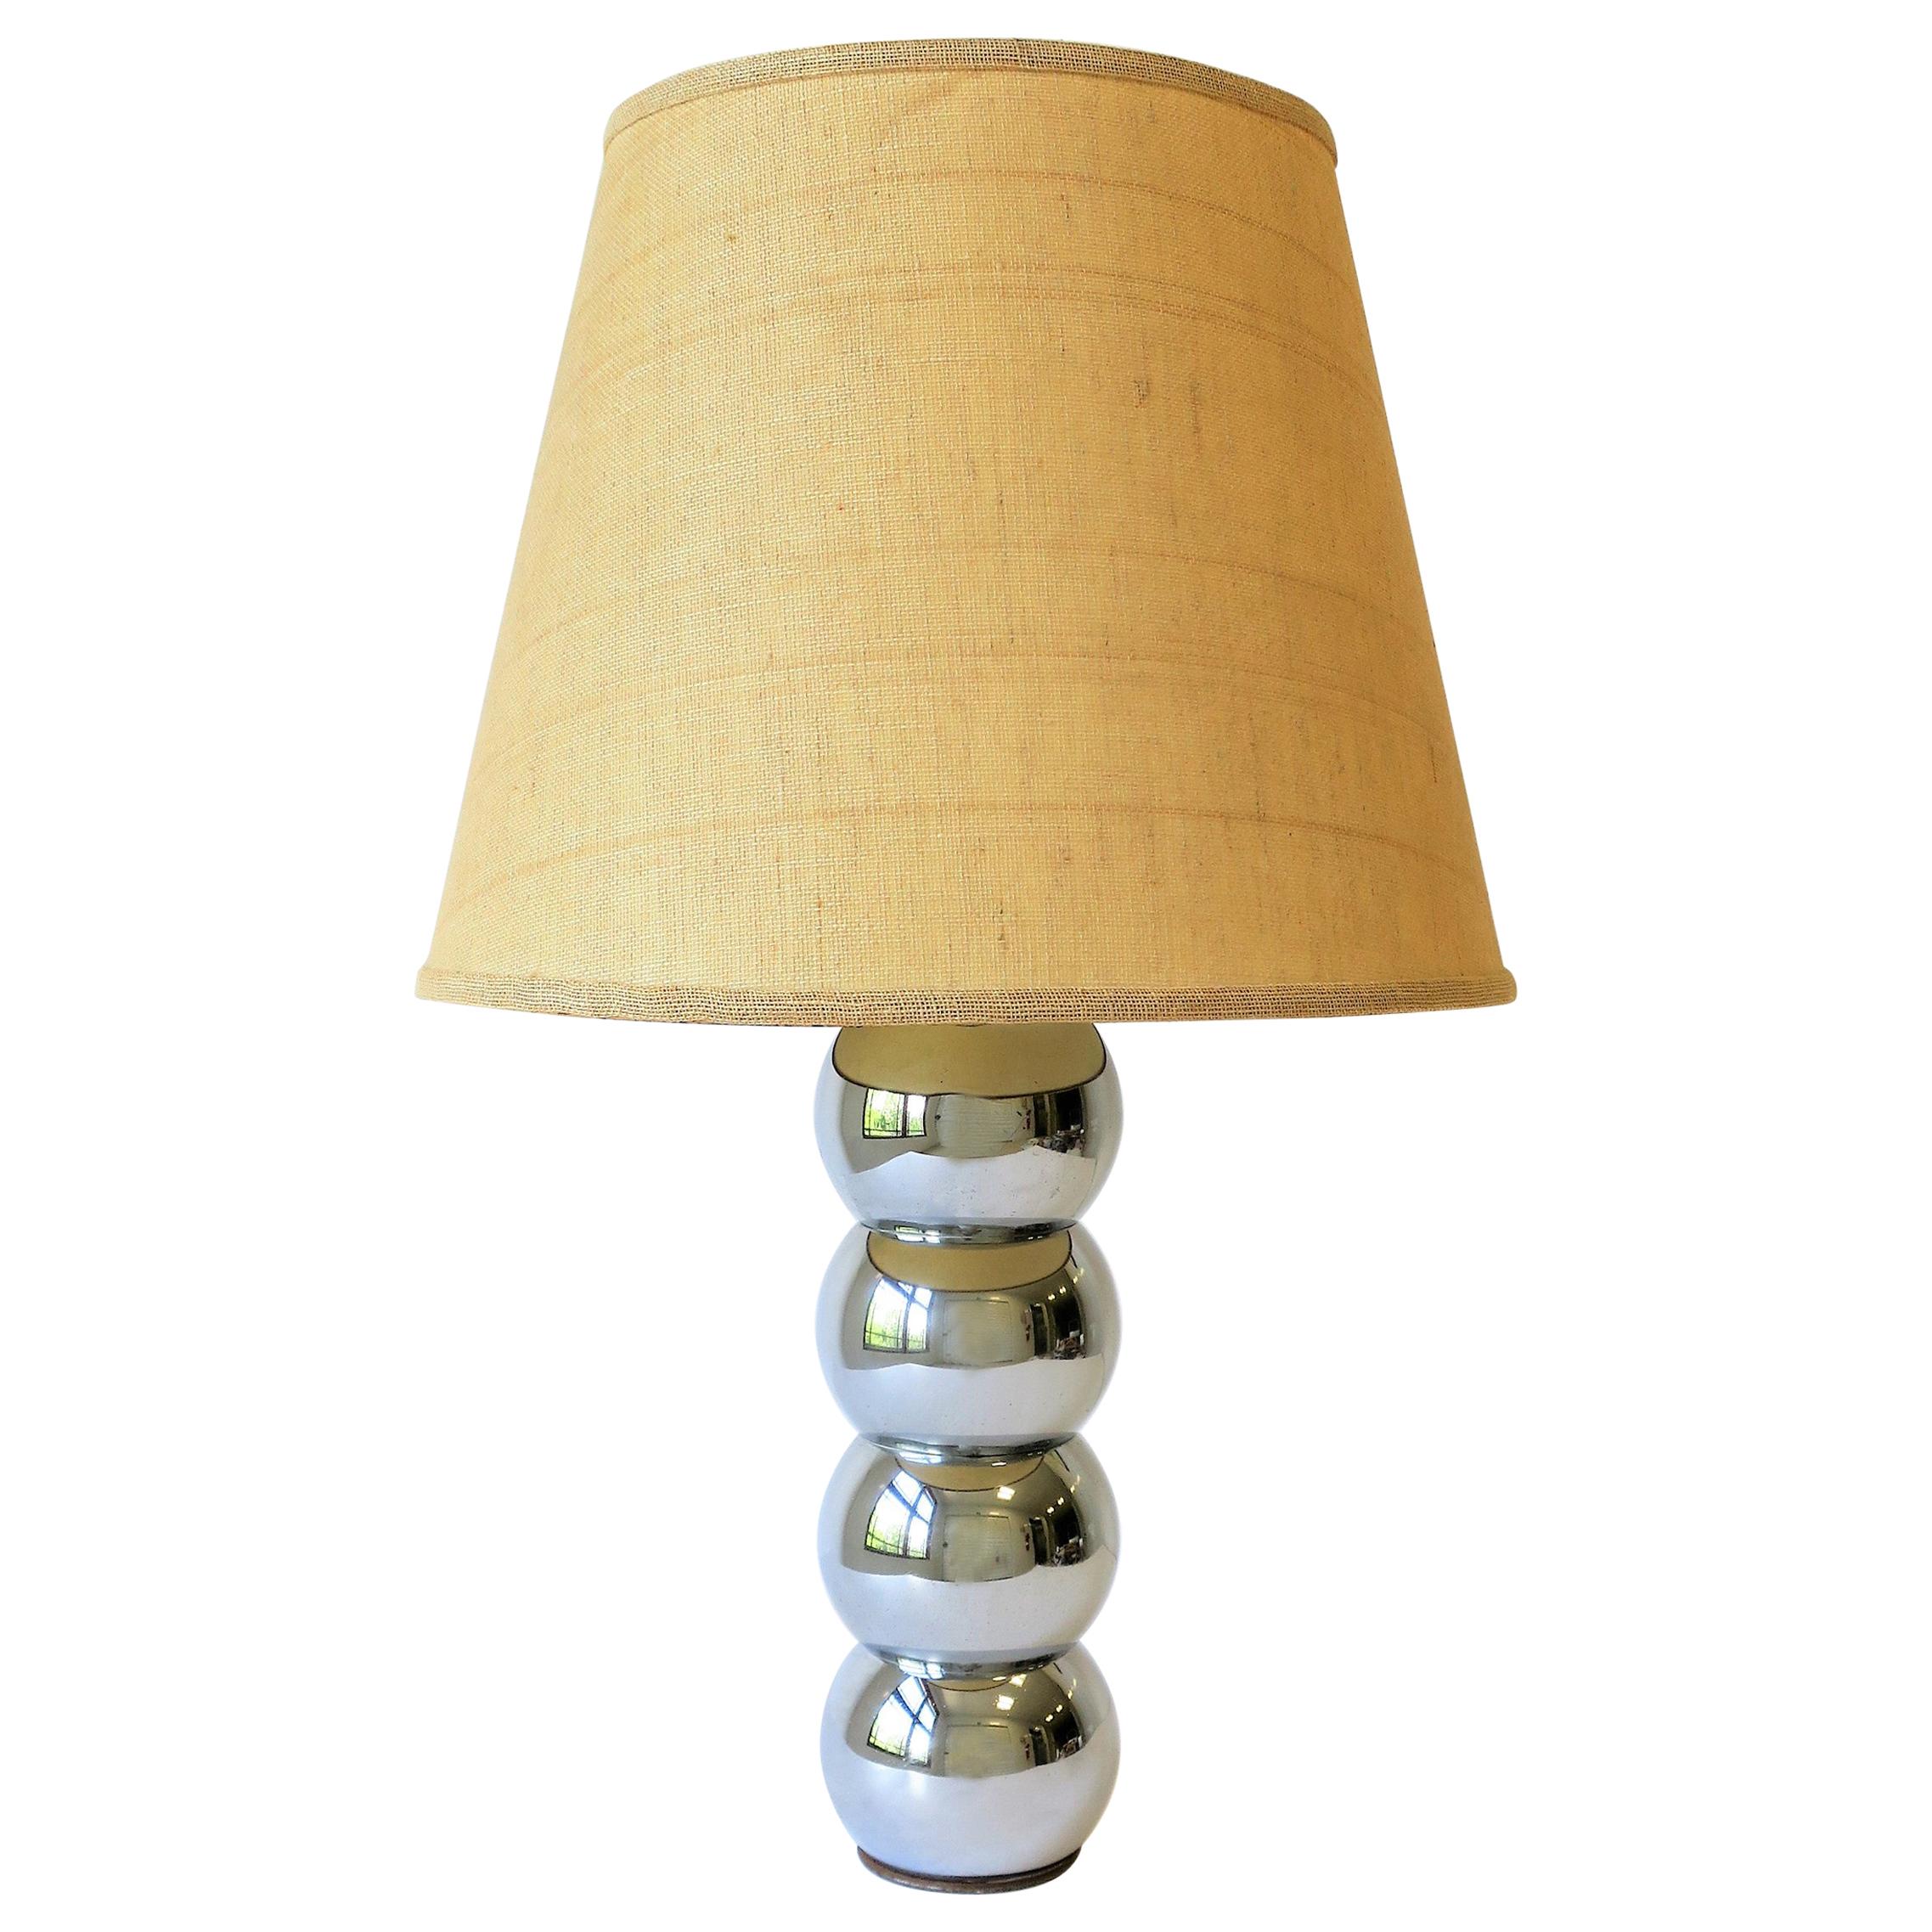 1970s Modern Stacked Chrome Ball Desk or Table Lamp Small 